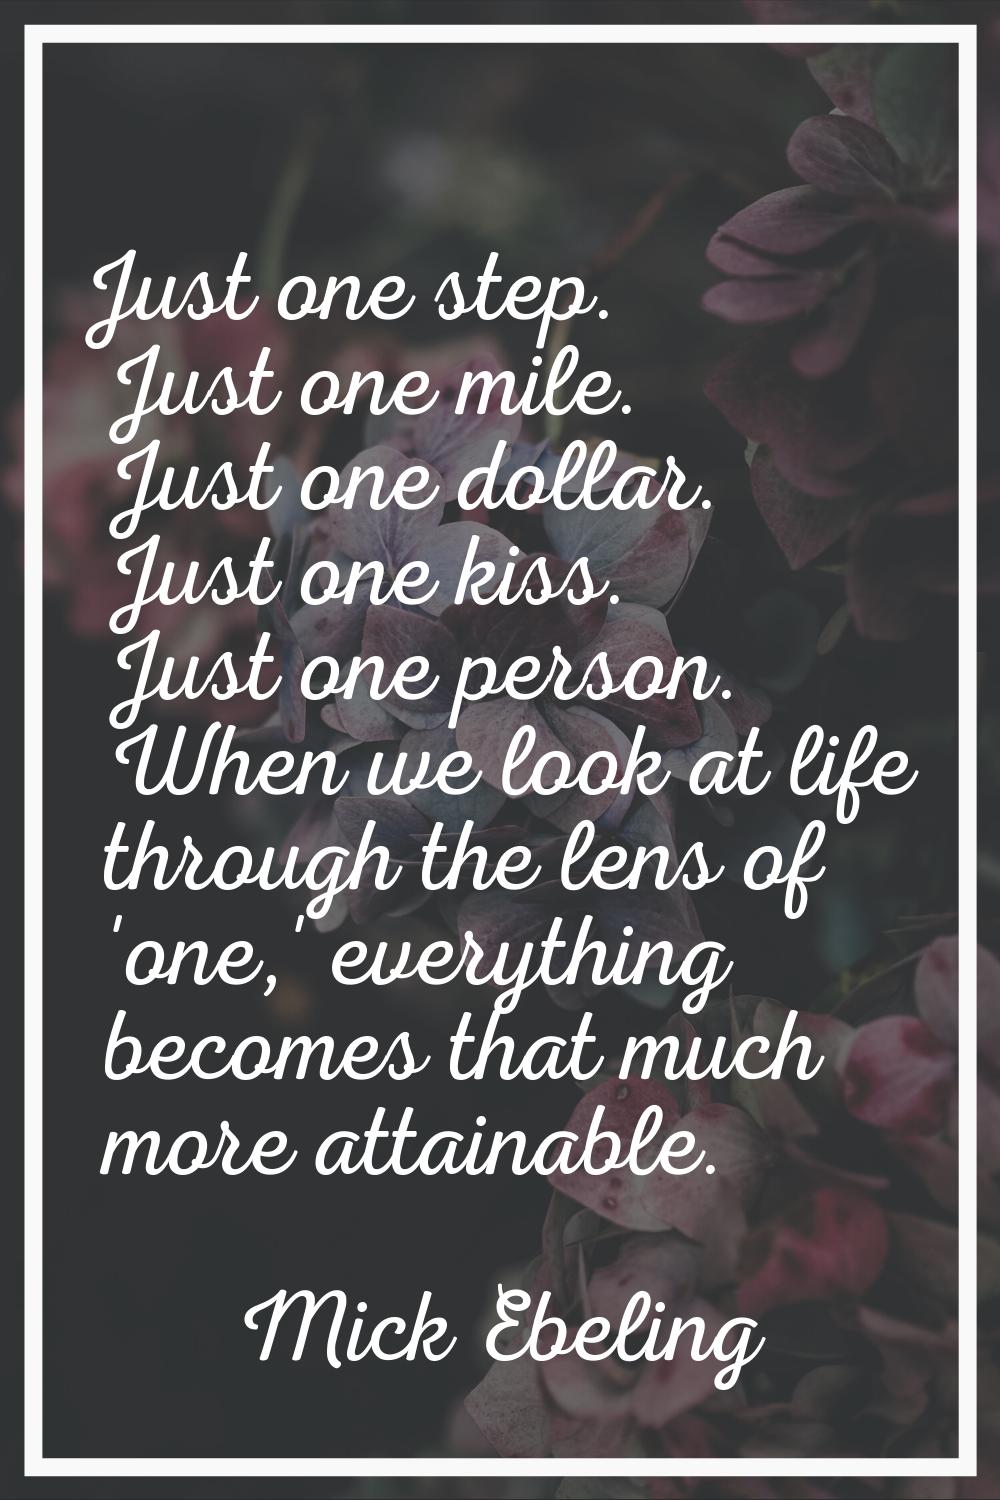 Just one step. Just one mile. Just one dollar. Just one kiss. Just one person. When we look at life